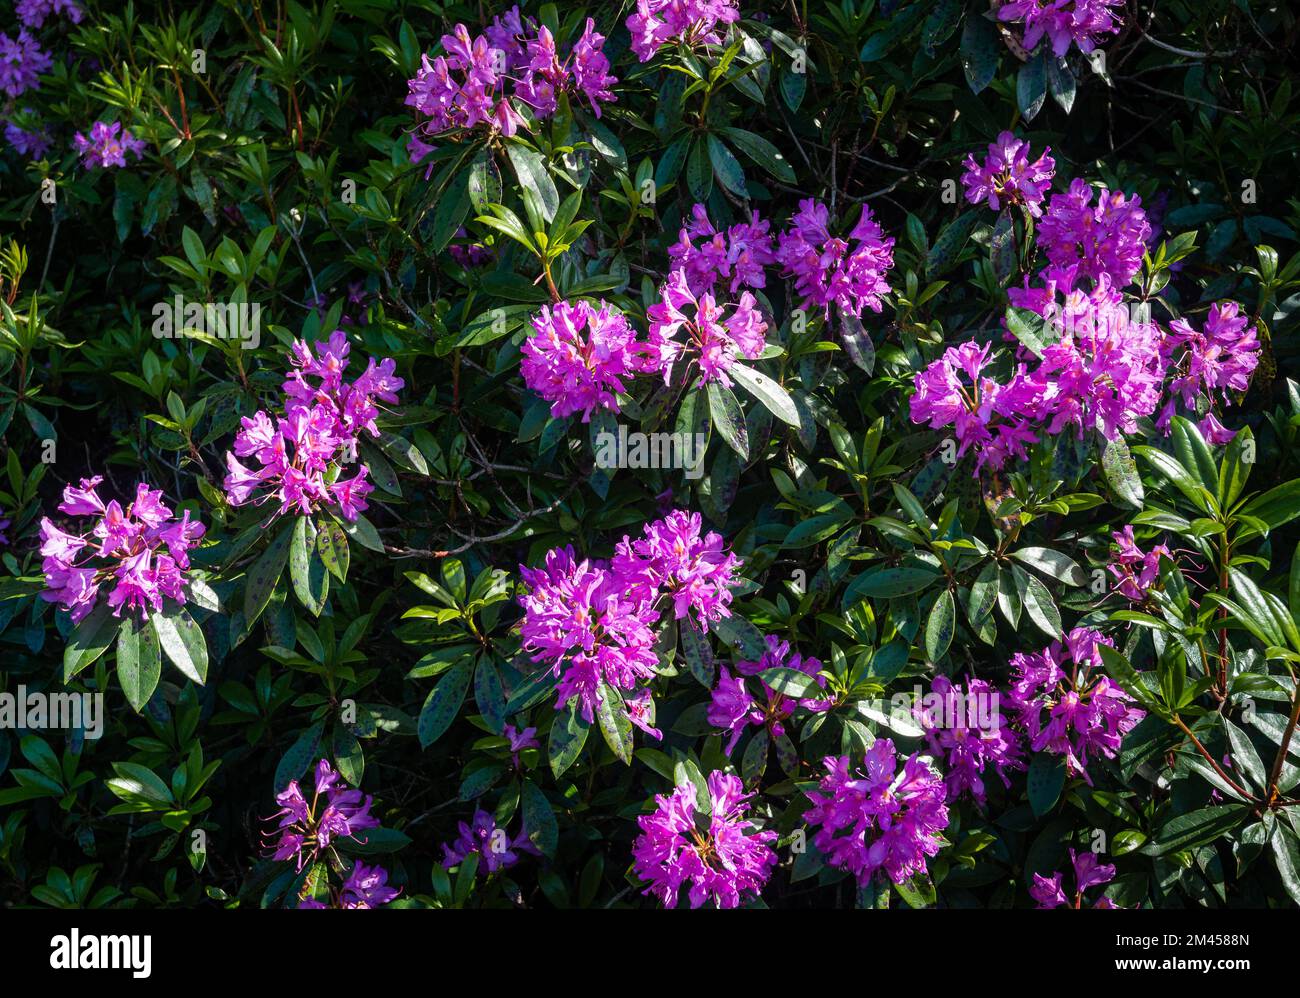 Close up of beautiful blooming purple rhododendron wild flower bushes in the Irish countryside. Stock Photo